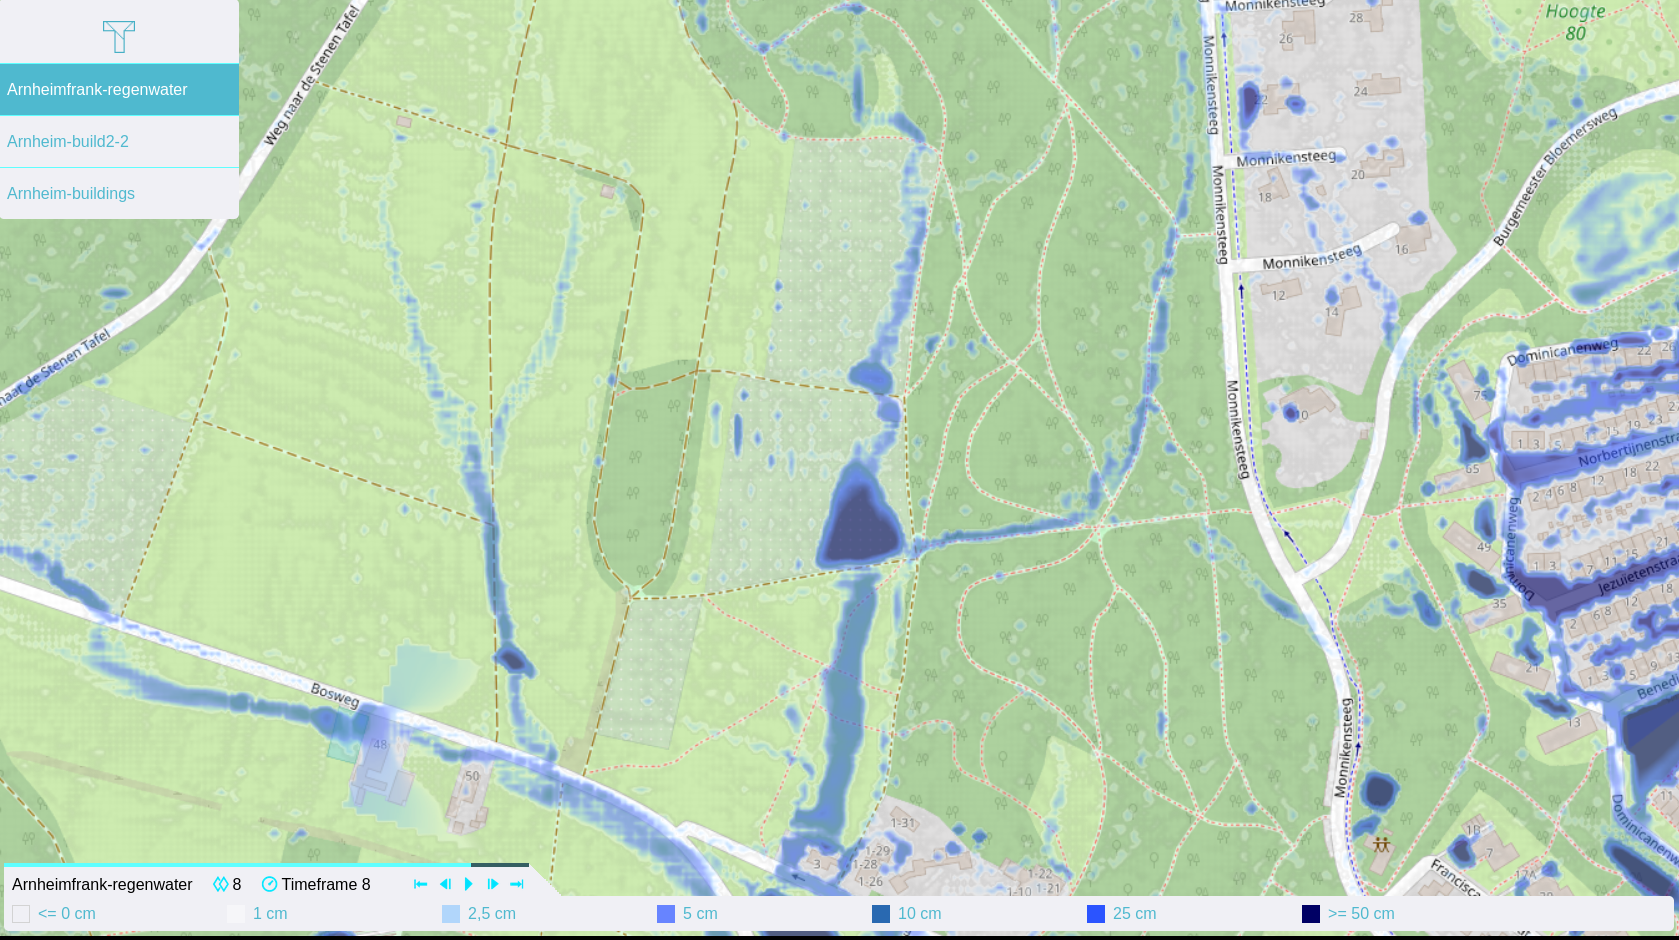 File:GeoShareViewer.png